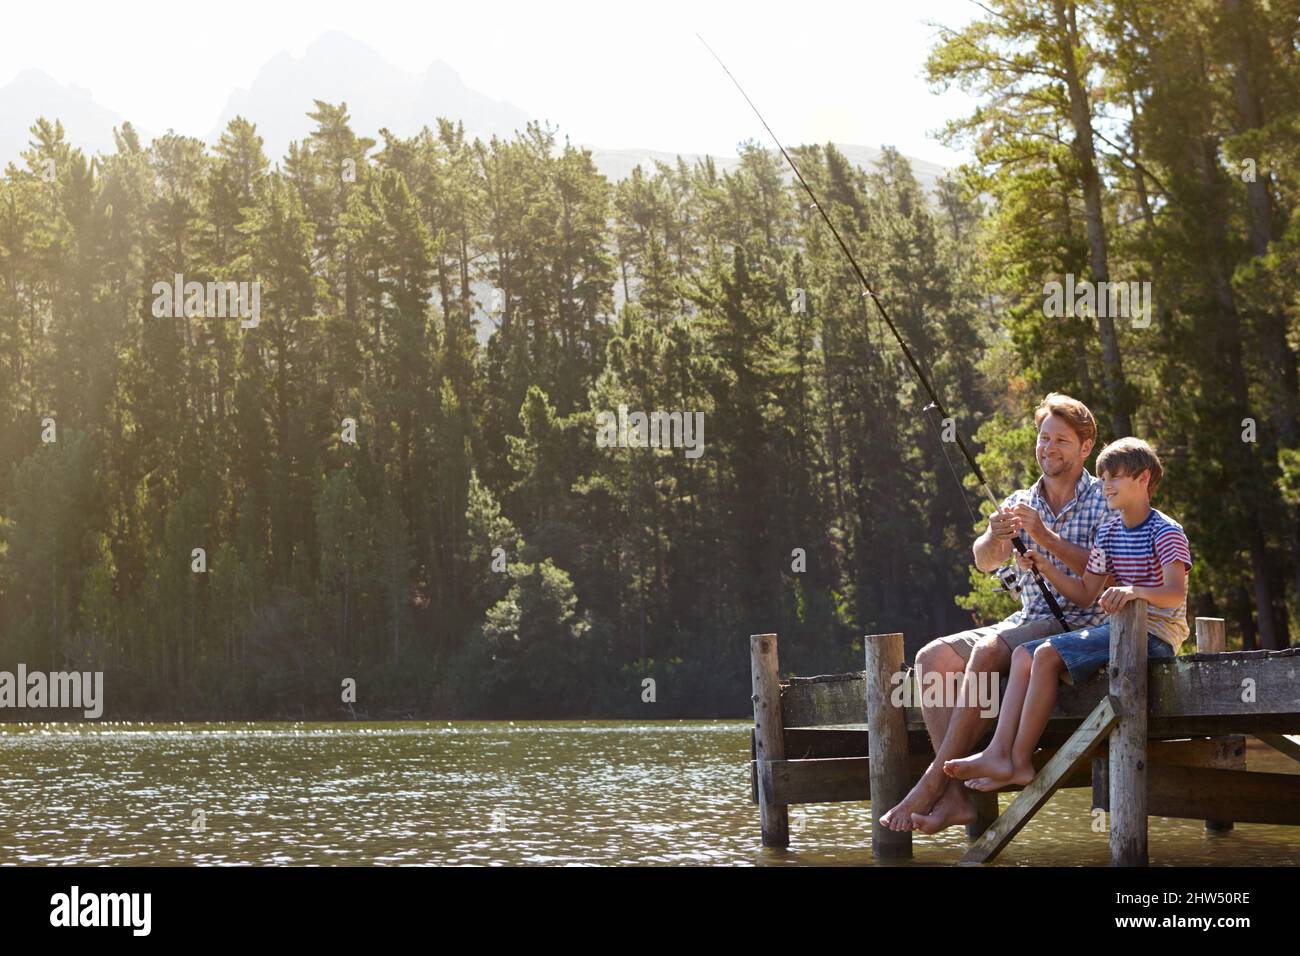 Bonding doesnt get better than this. Shot of a father and son on a fishing trip. Stock Photo